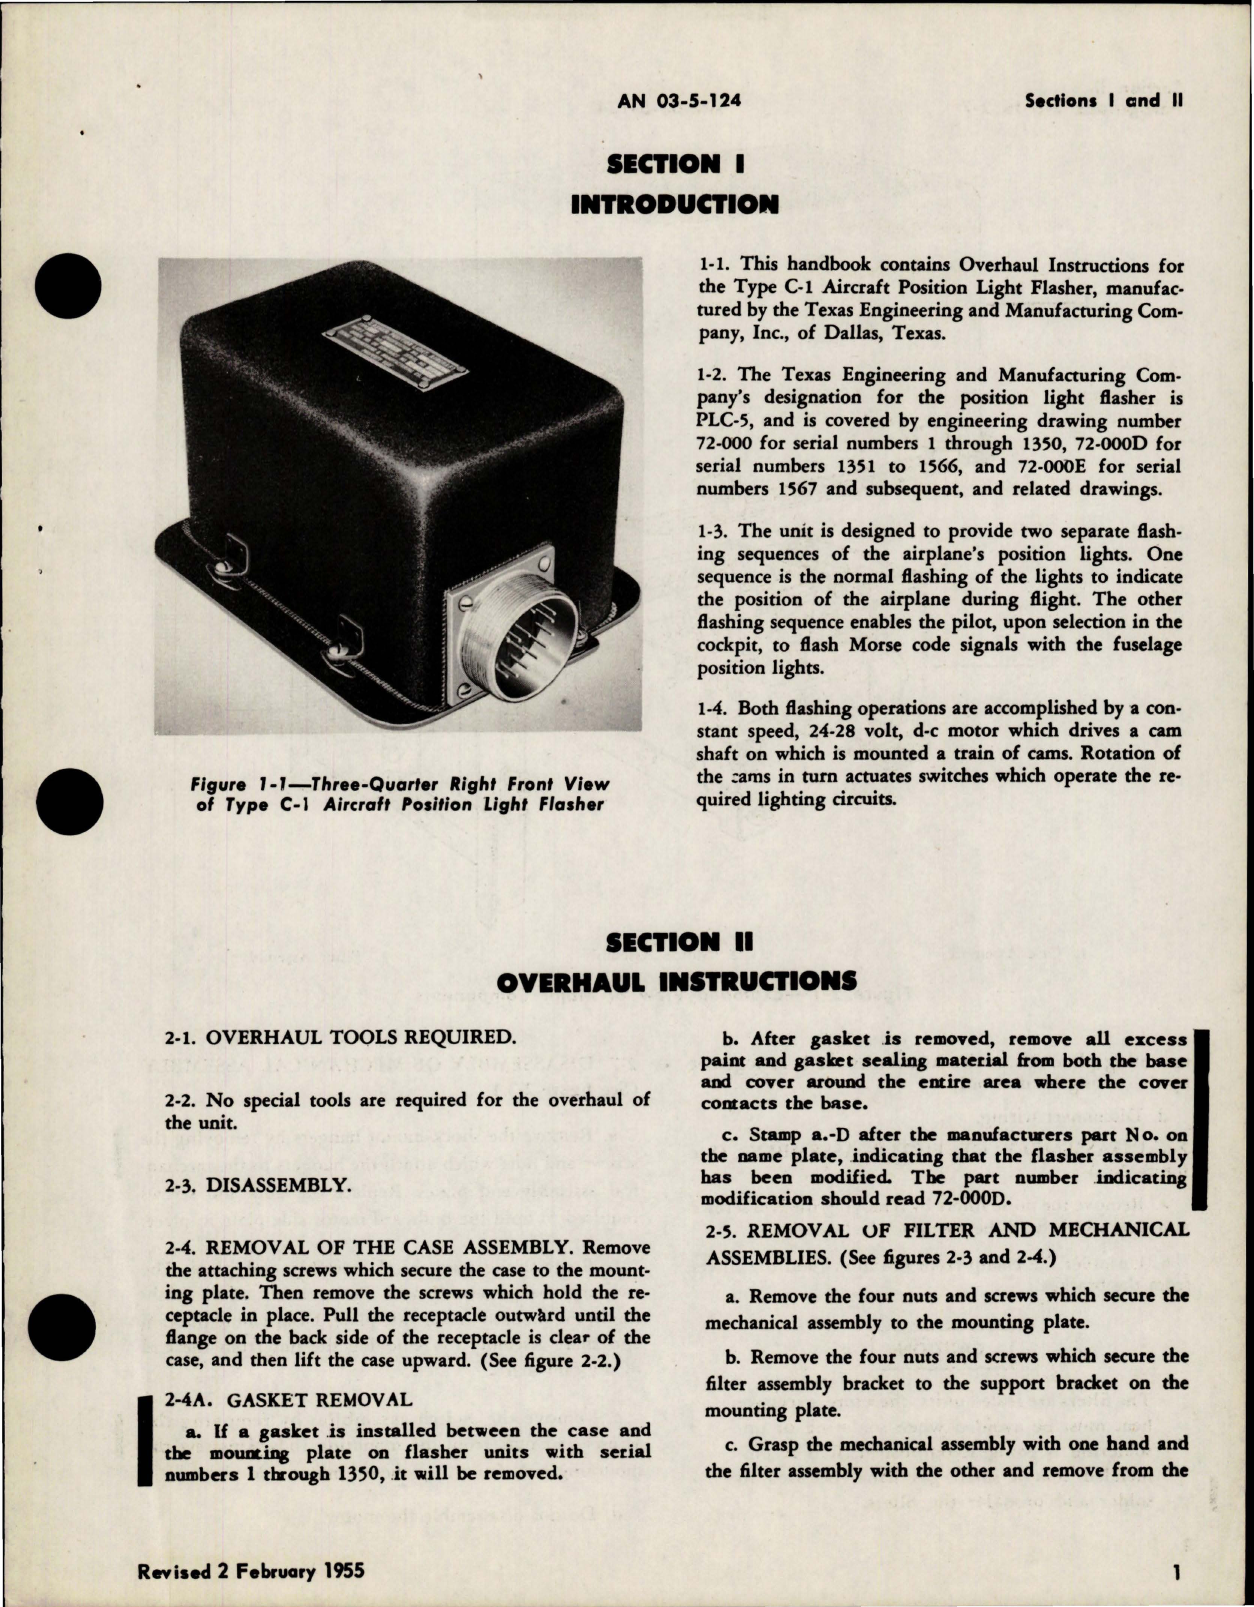 Sample page 5 from AirCorps Library document: Overhaul Instructions for Position Light Flasher - Type C-1